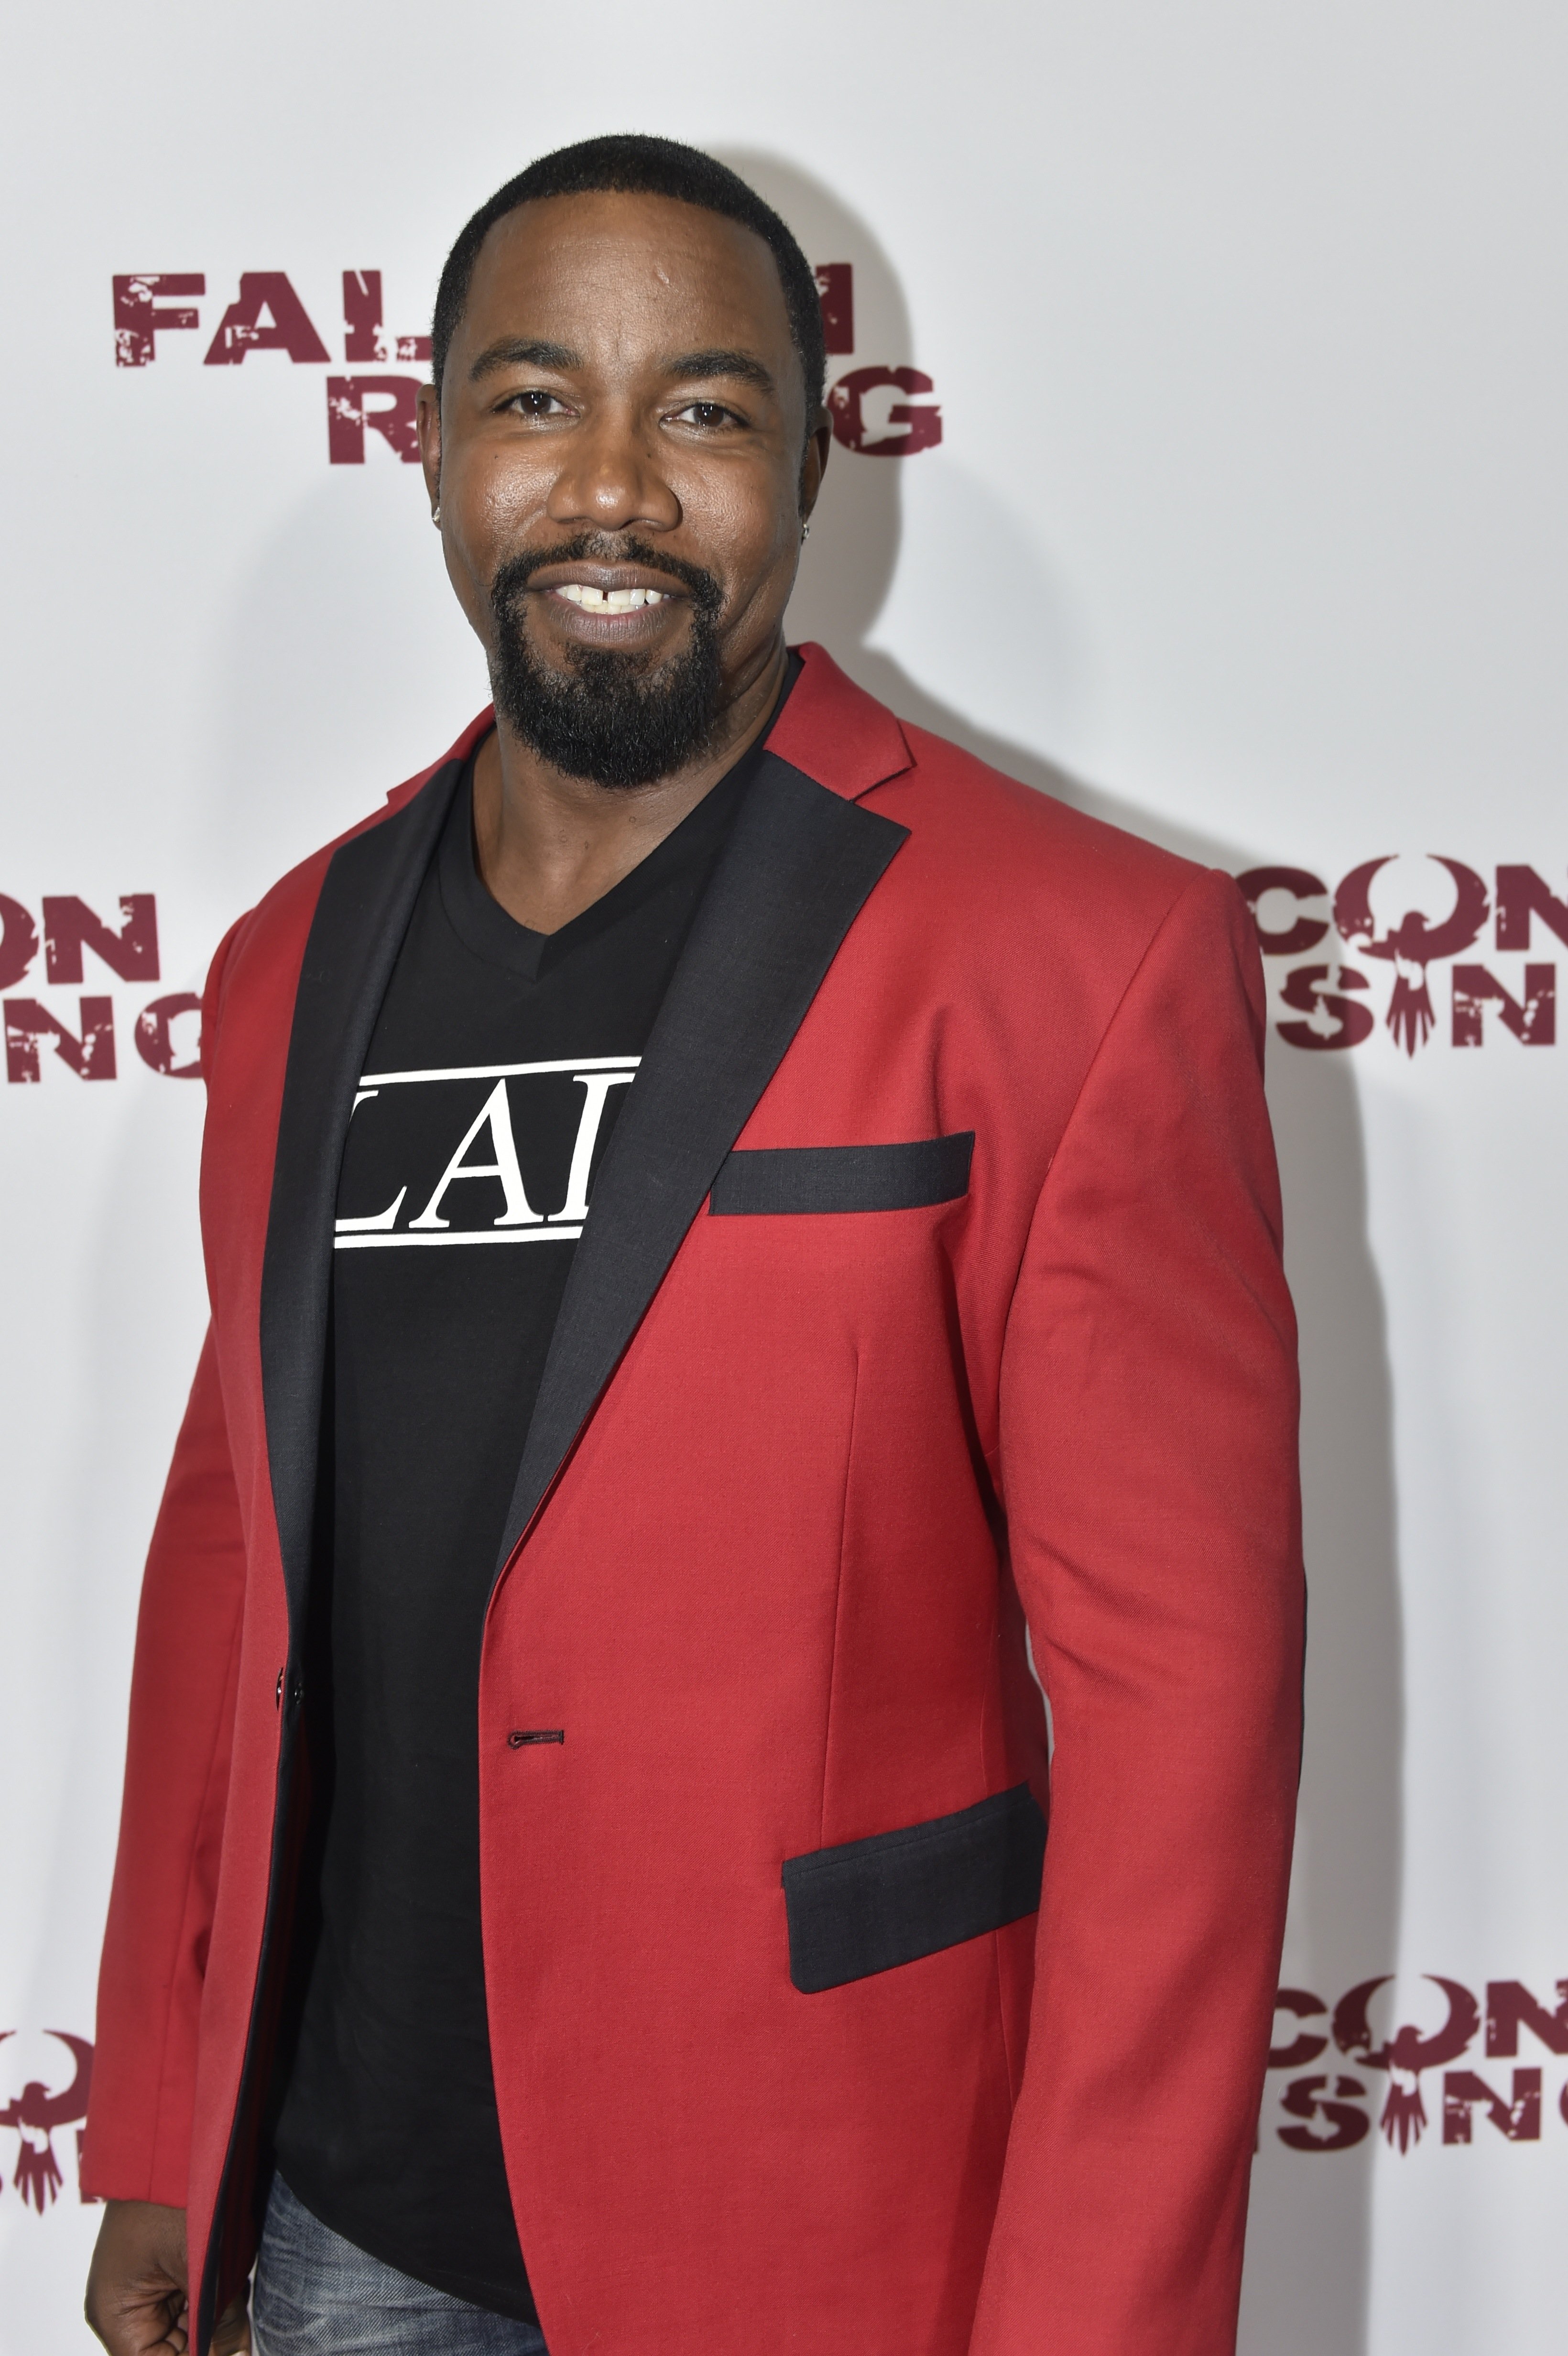 Michael Jai White at the advance screening of "Falcon Rising" movie on September 5, 2014 in Morrow, Georgia. | Photo: Getty Images